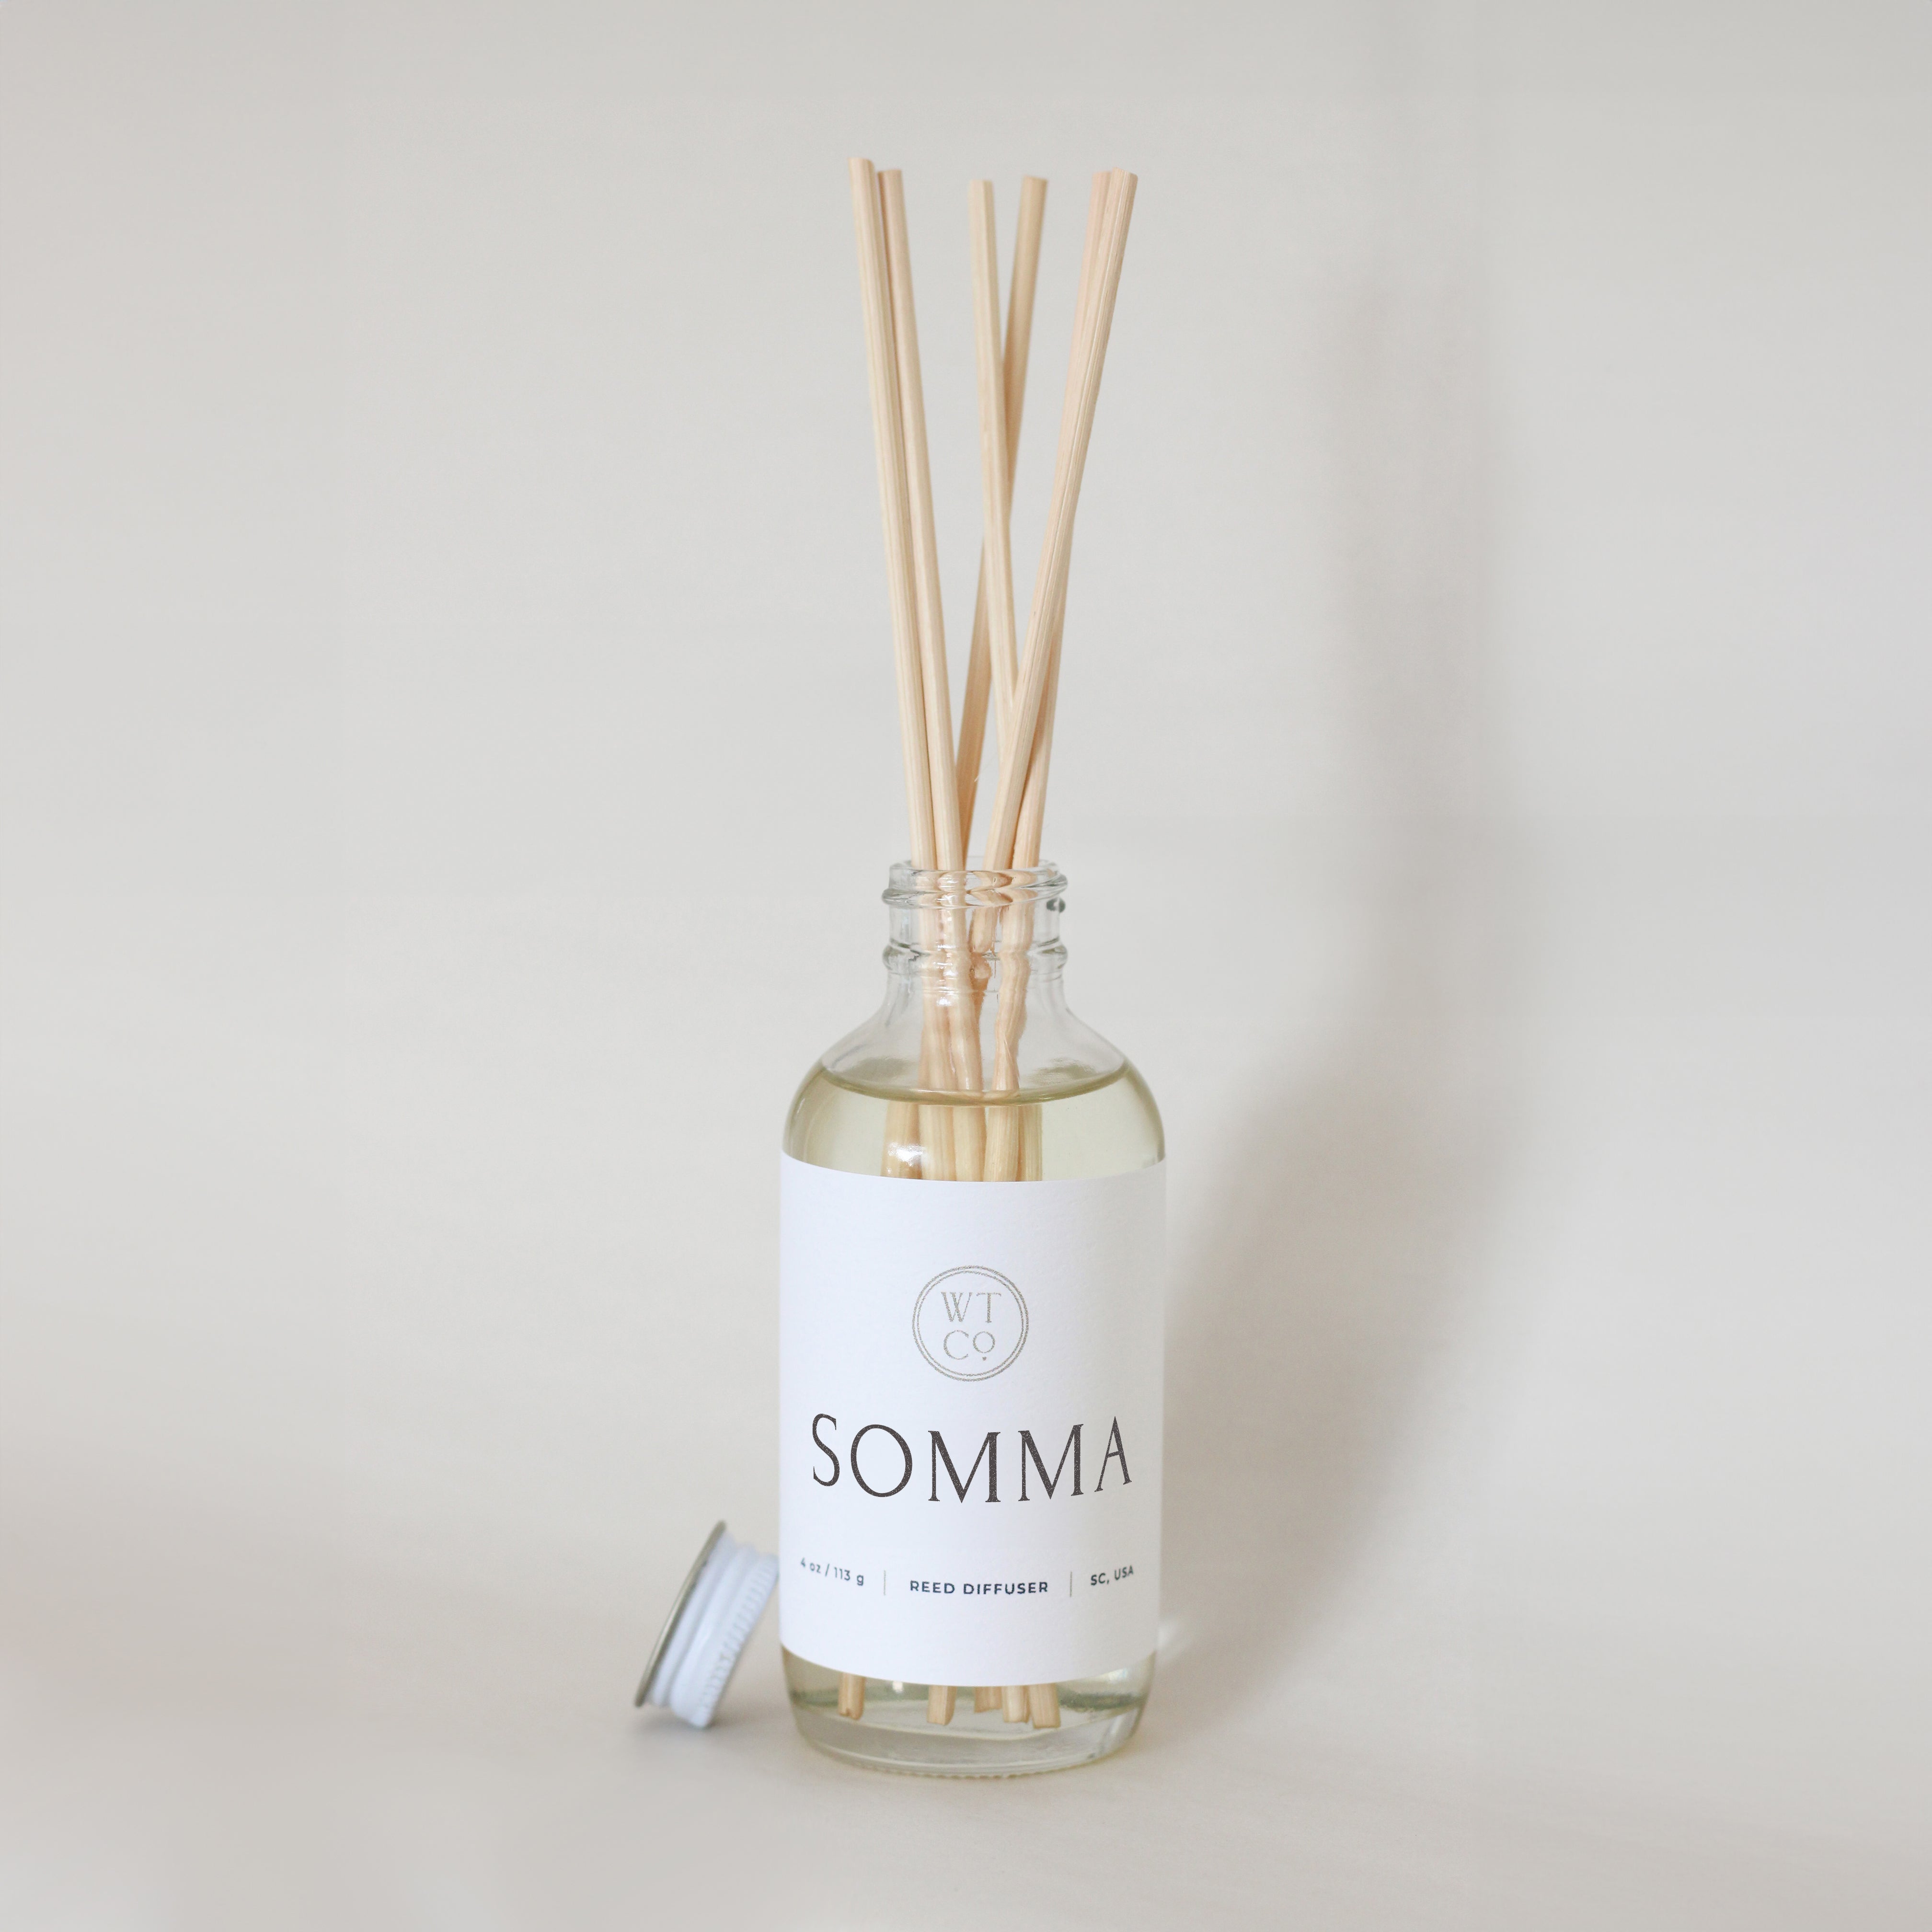 Somma Reed Diffuser | Well-Taylored Co.